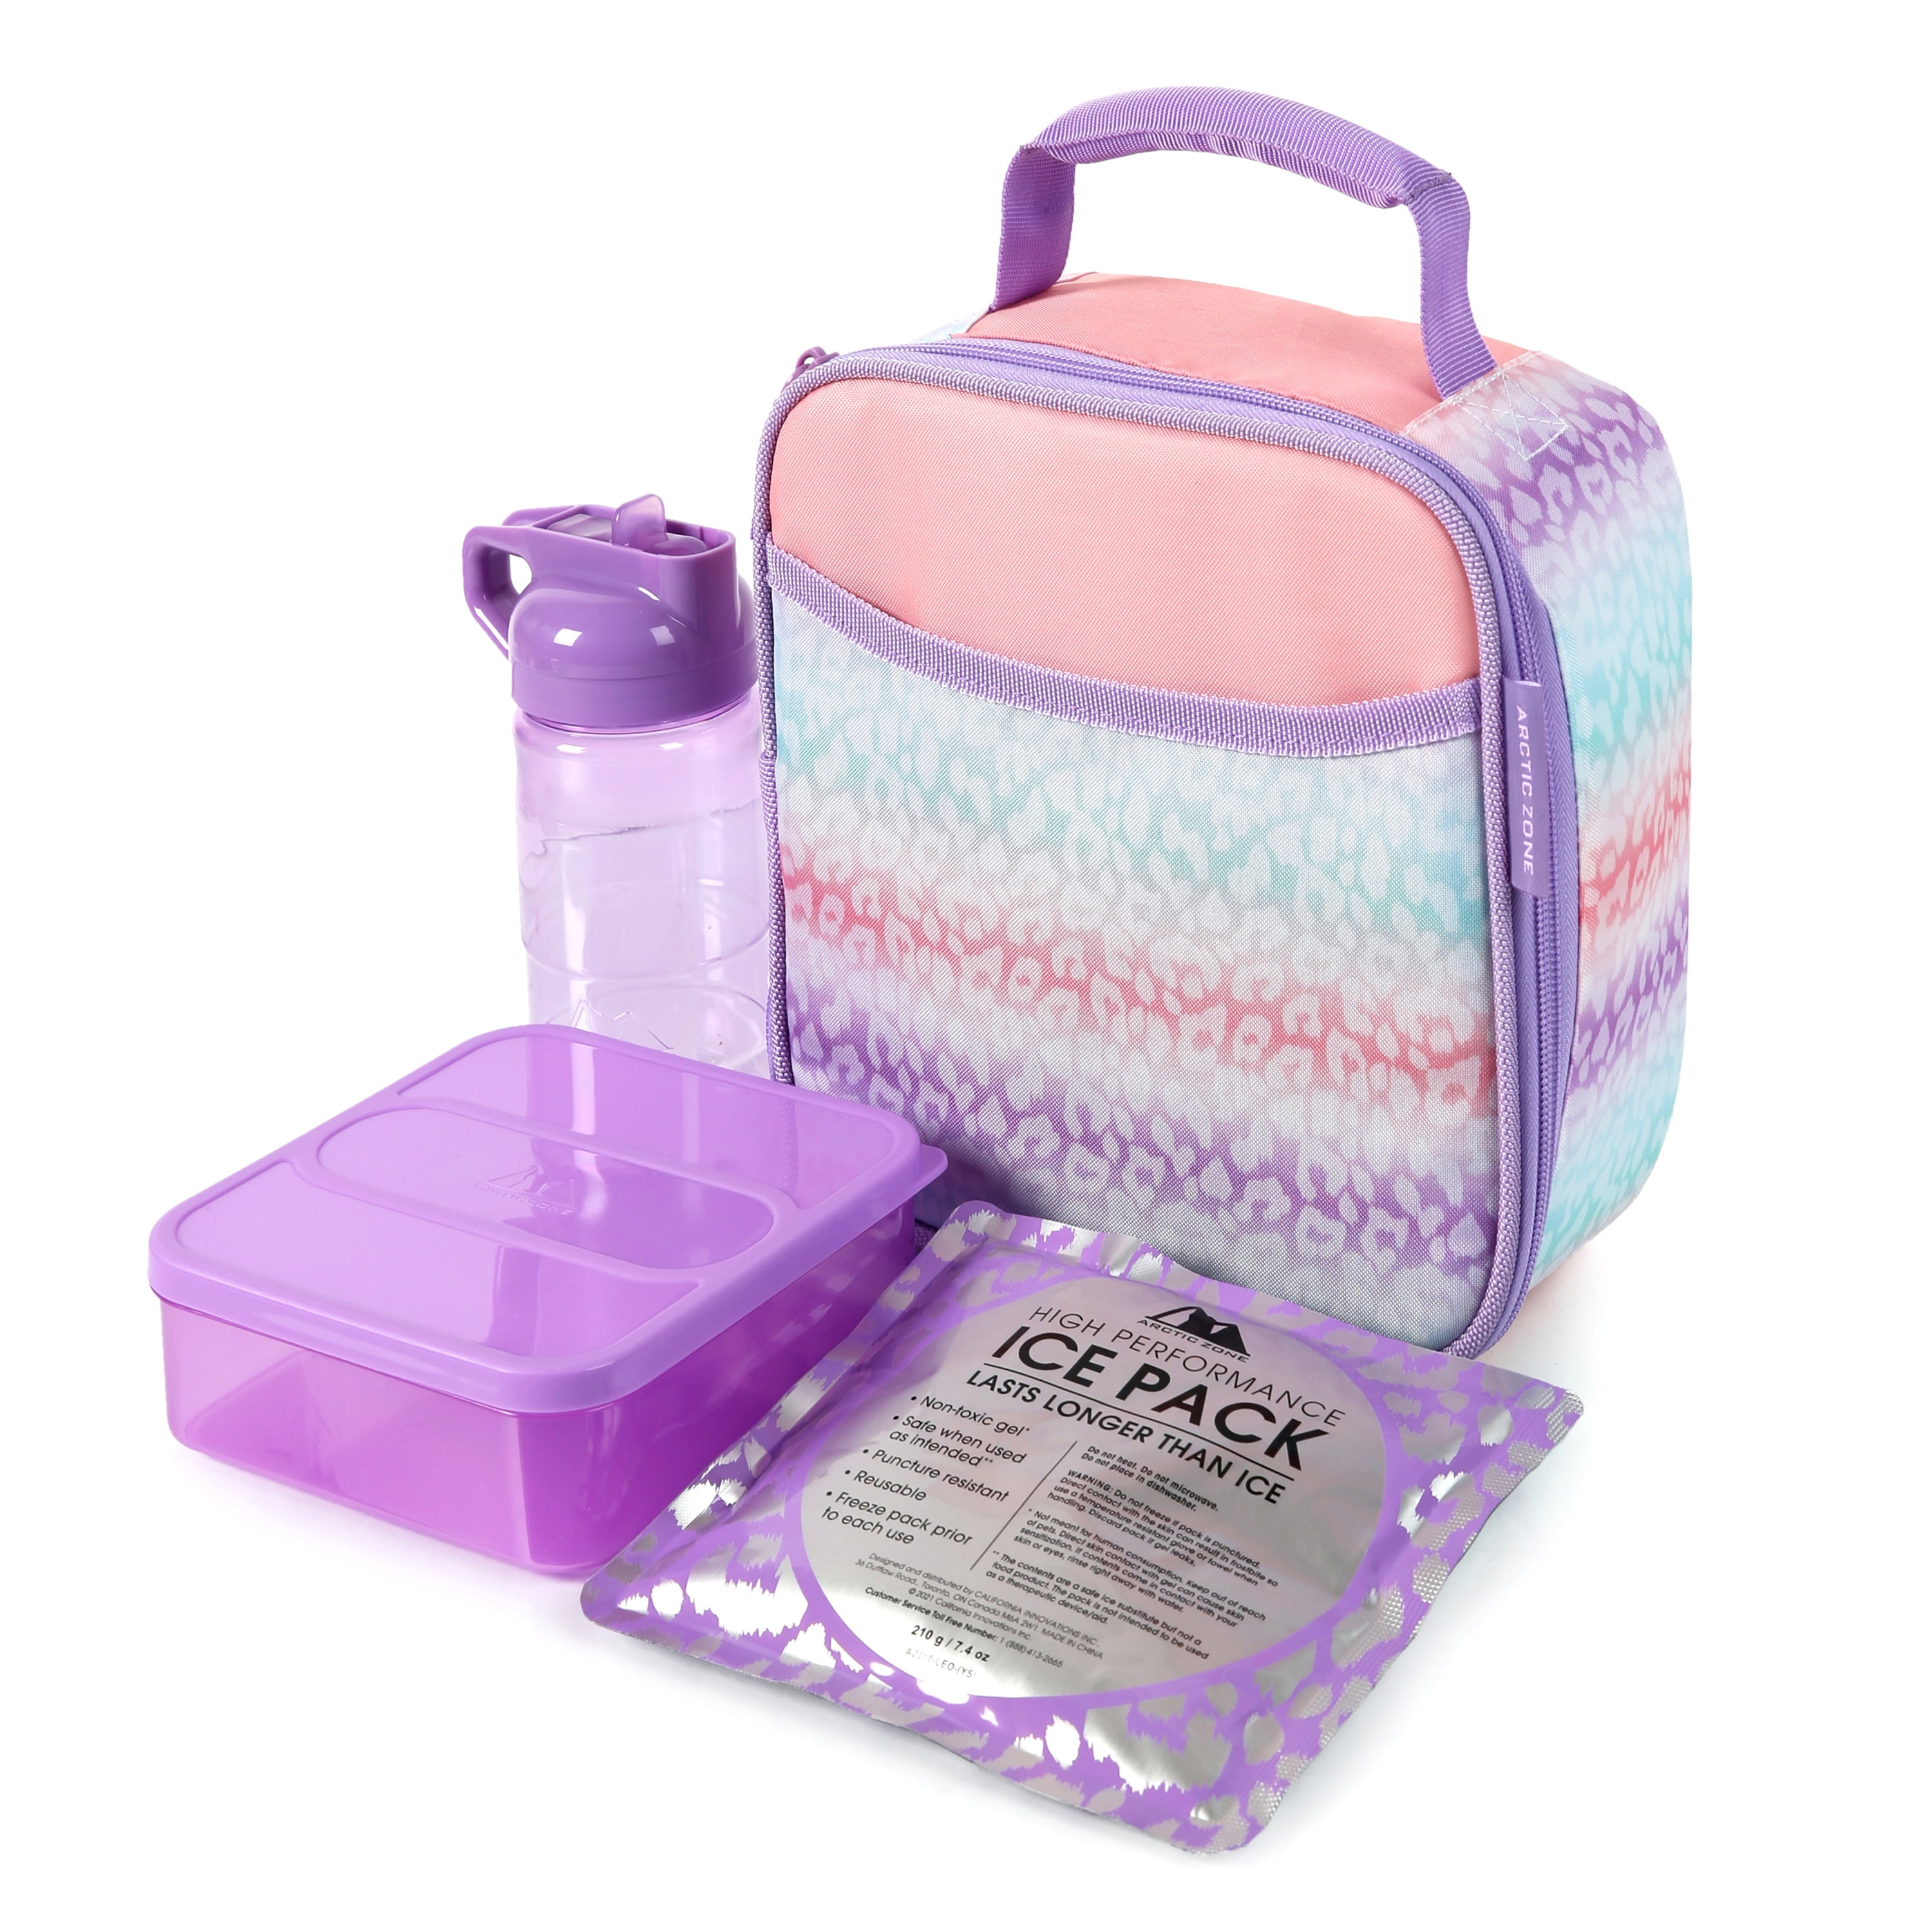 Arctic Zone Reusable Lunch Box Combo Kit with Accessories, Leopard Print 